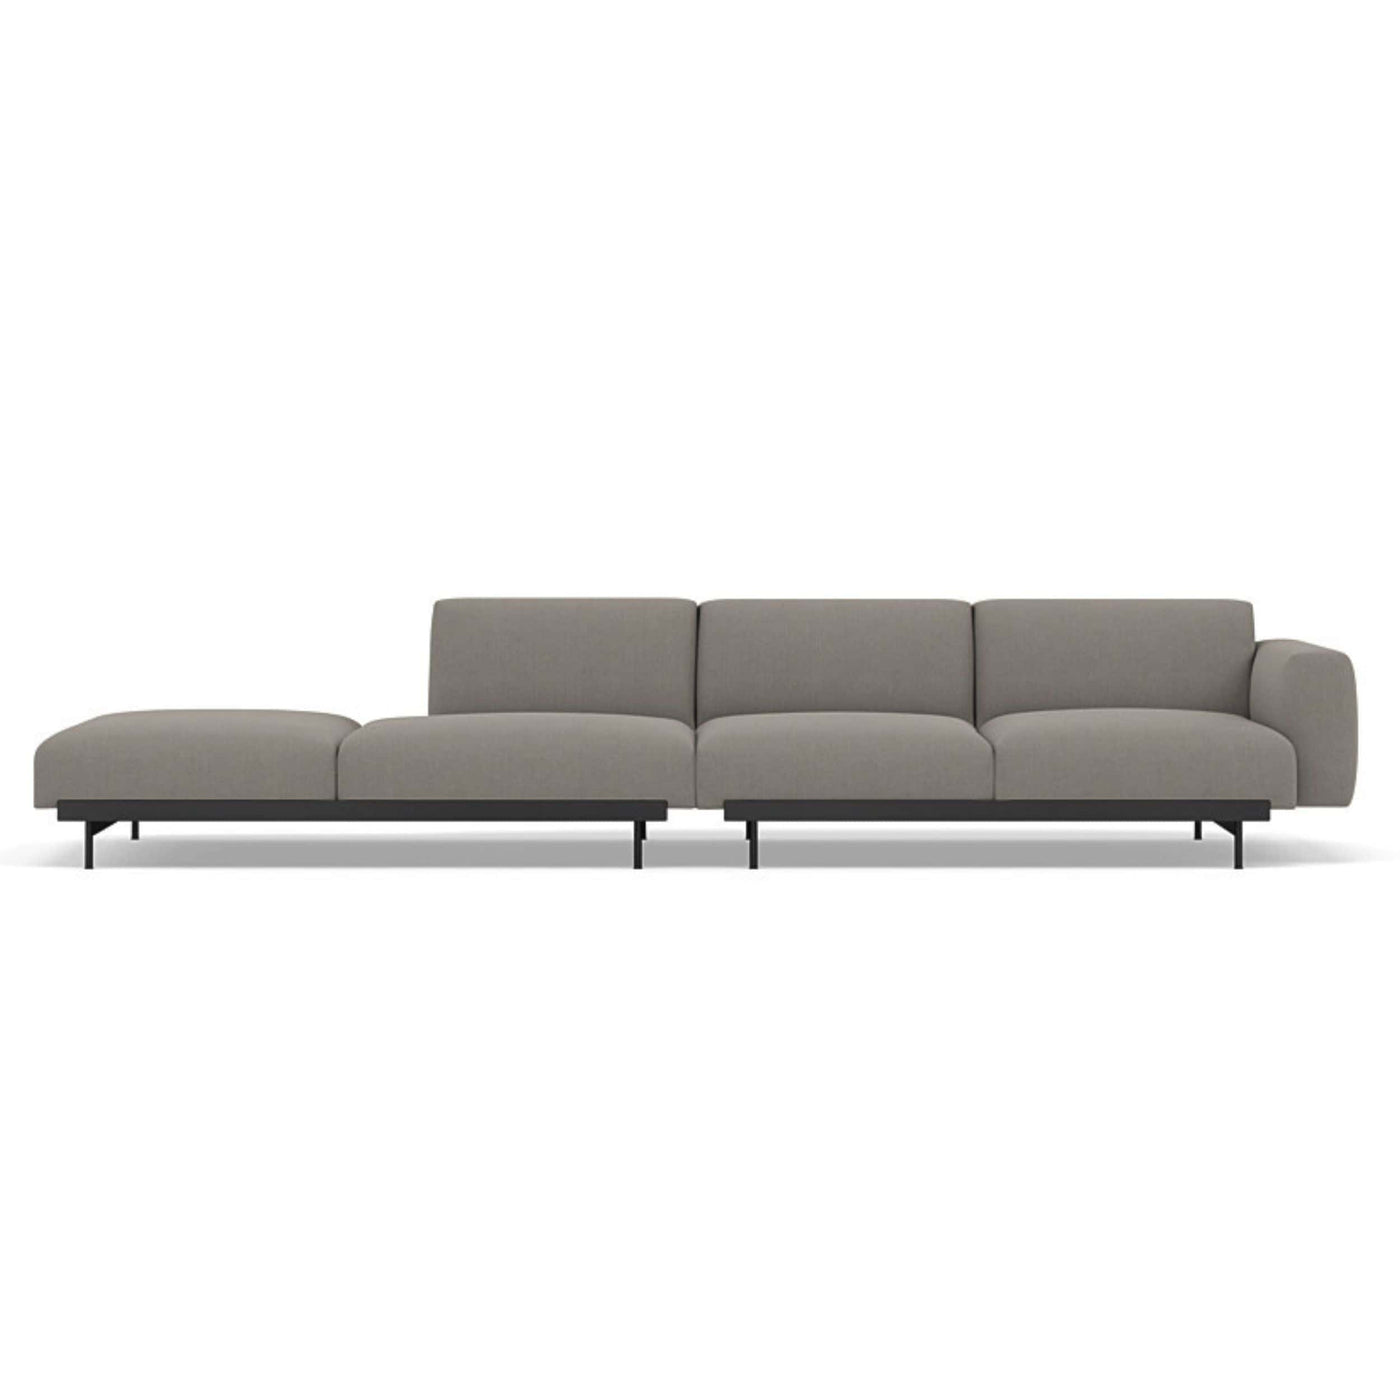 Muuto In Situ Modular 4 Seater Sofa configuration 3 in fiord 262. Made to order from someday designs. #colour_fiord-262